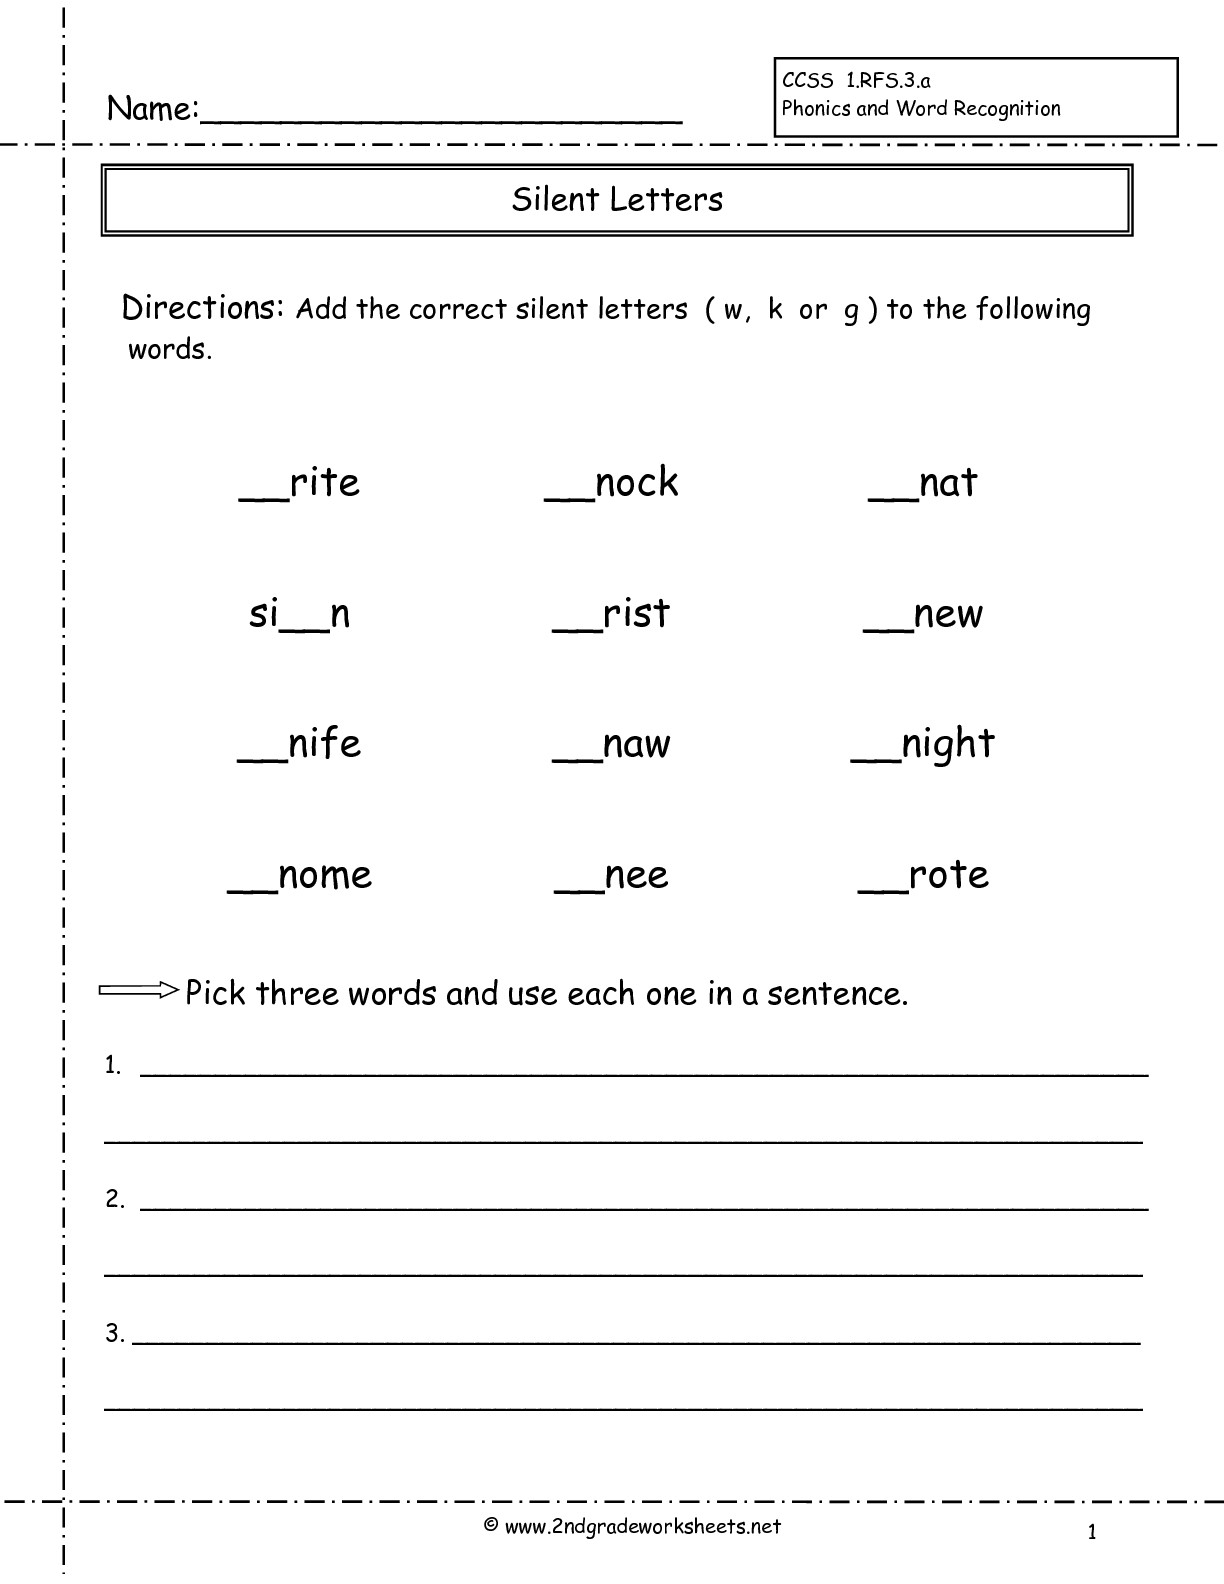 Second Grade Phonics Worksheets And Flashcards within Letter E Worksheets For Grade 2